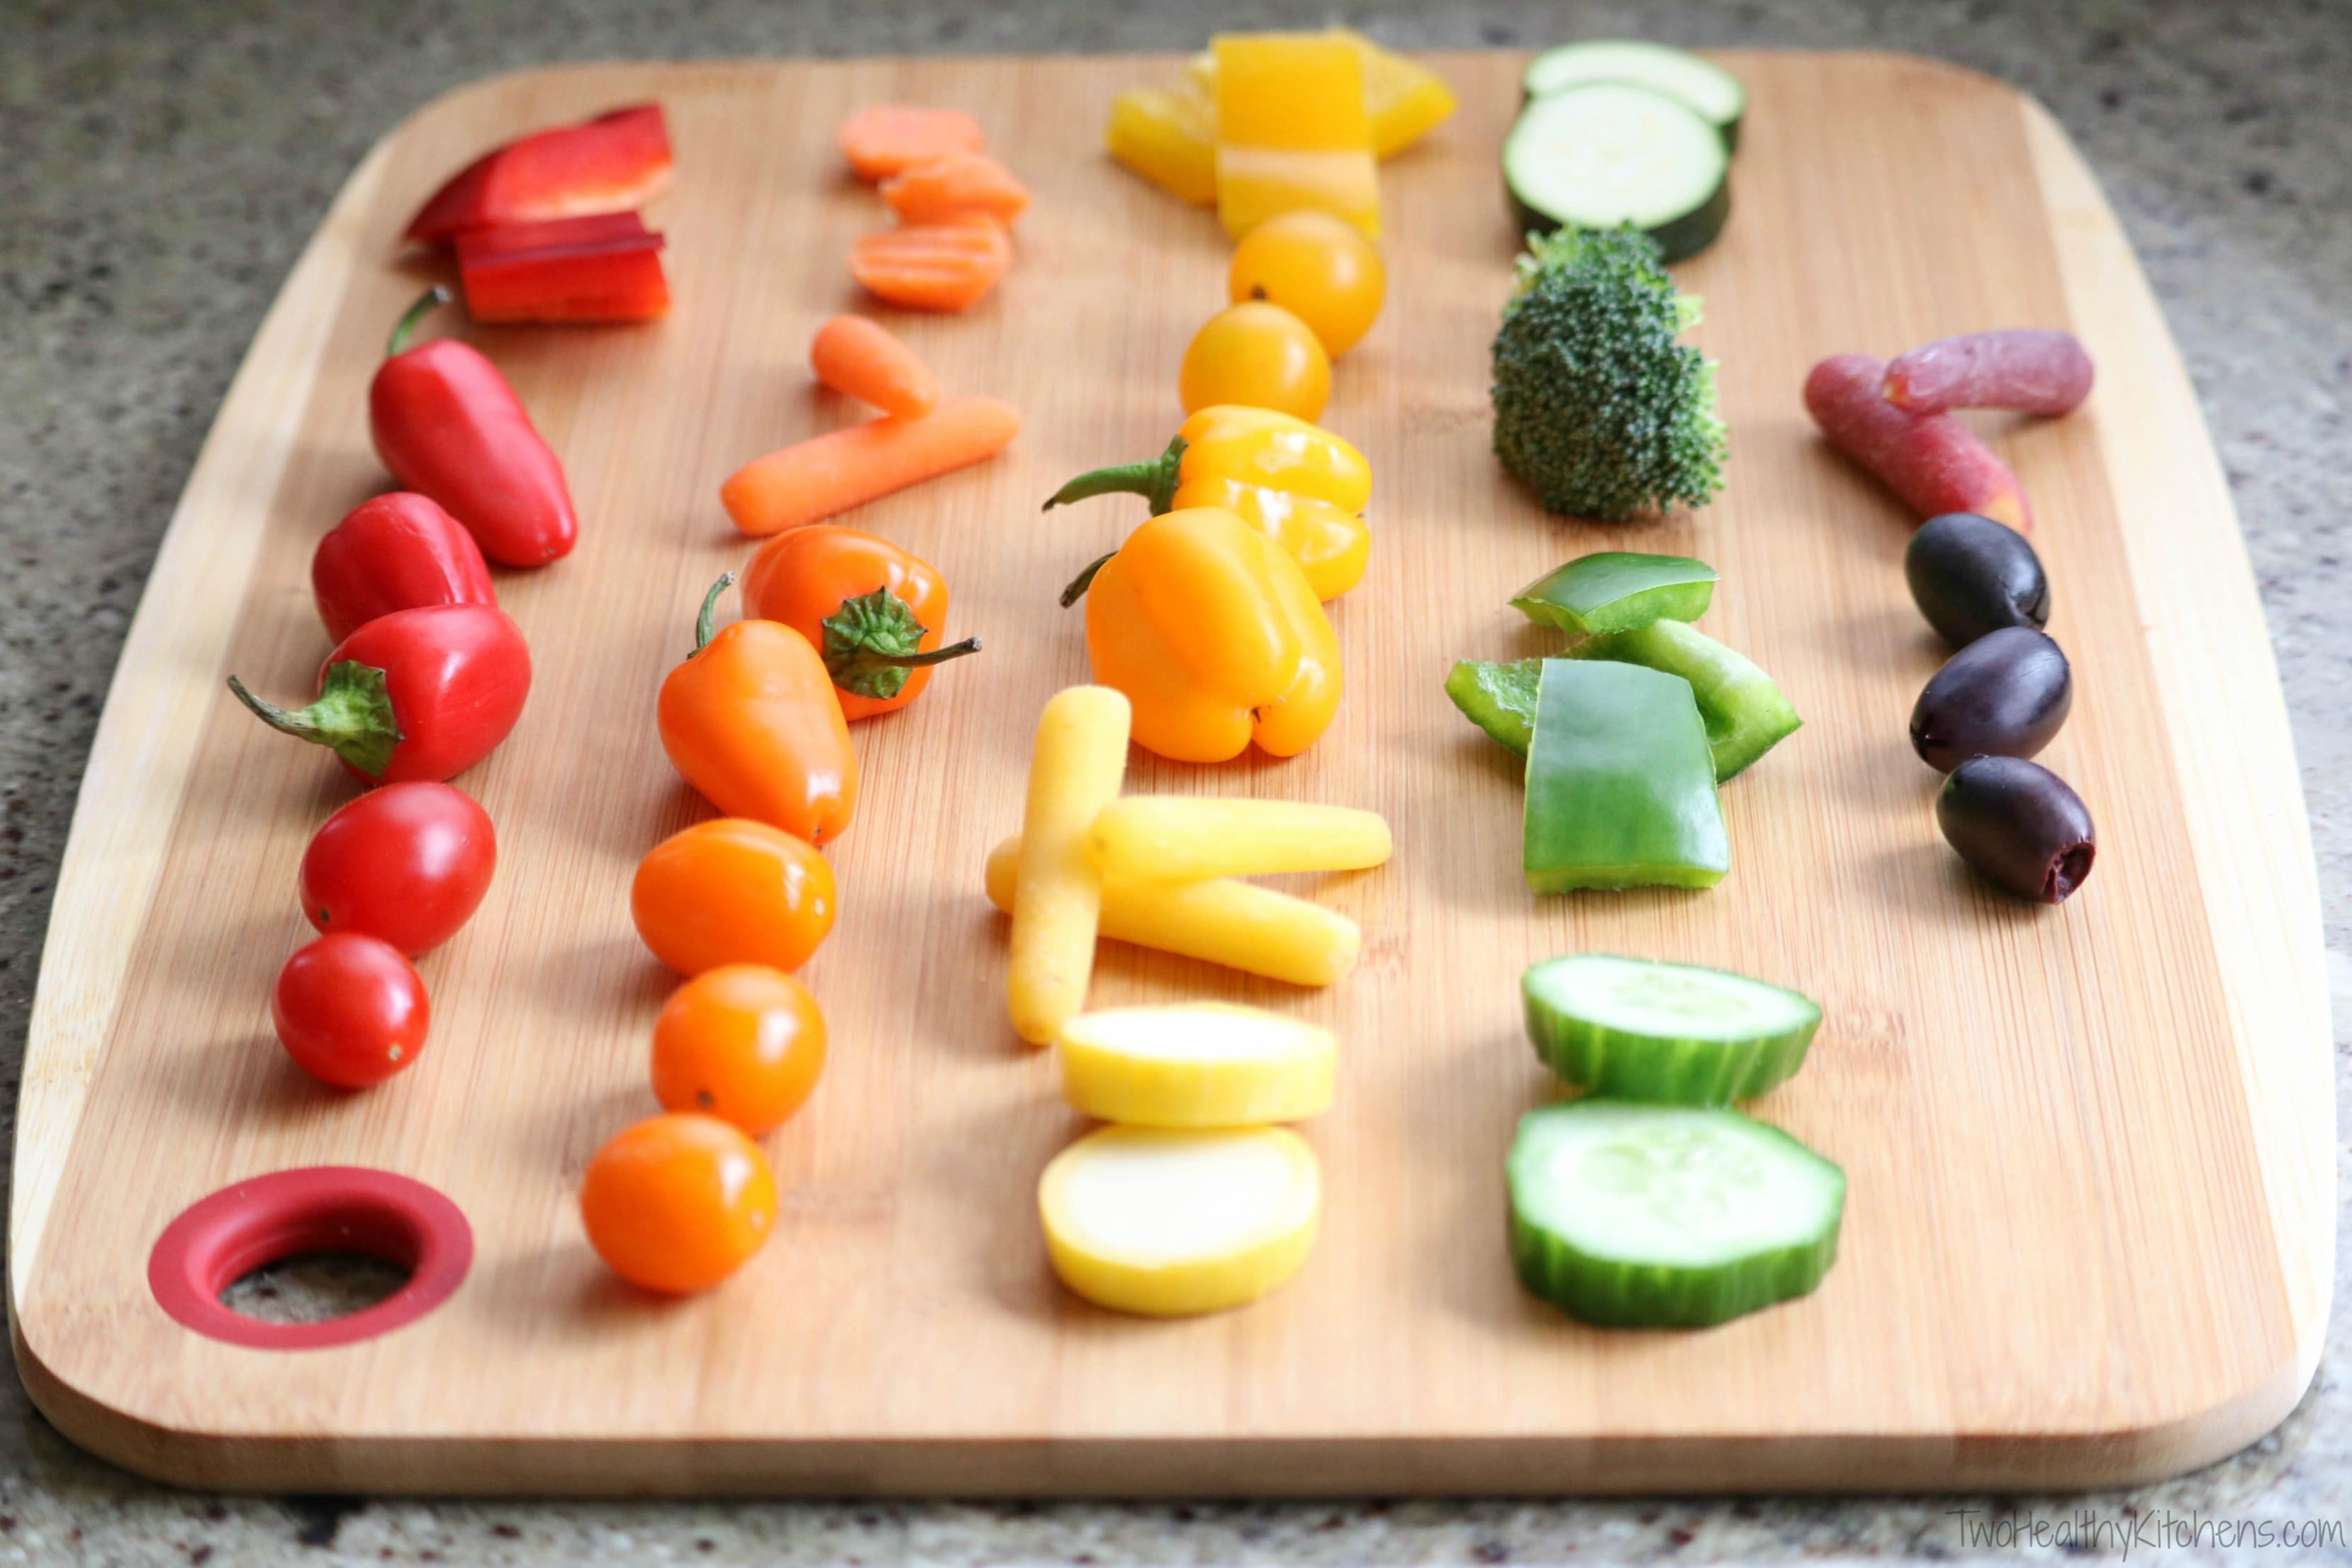 Bamboo cutting board with five lines of color-grouped vegetables: (L to R) red, orange, yellow, green and purple.